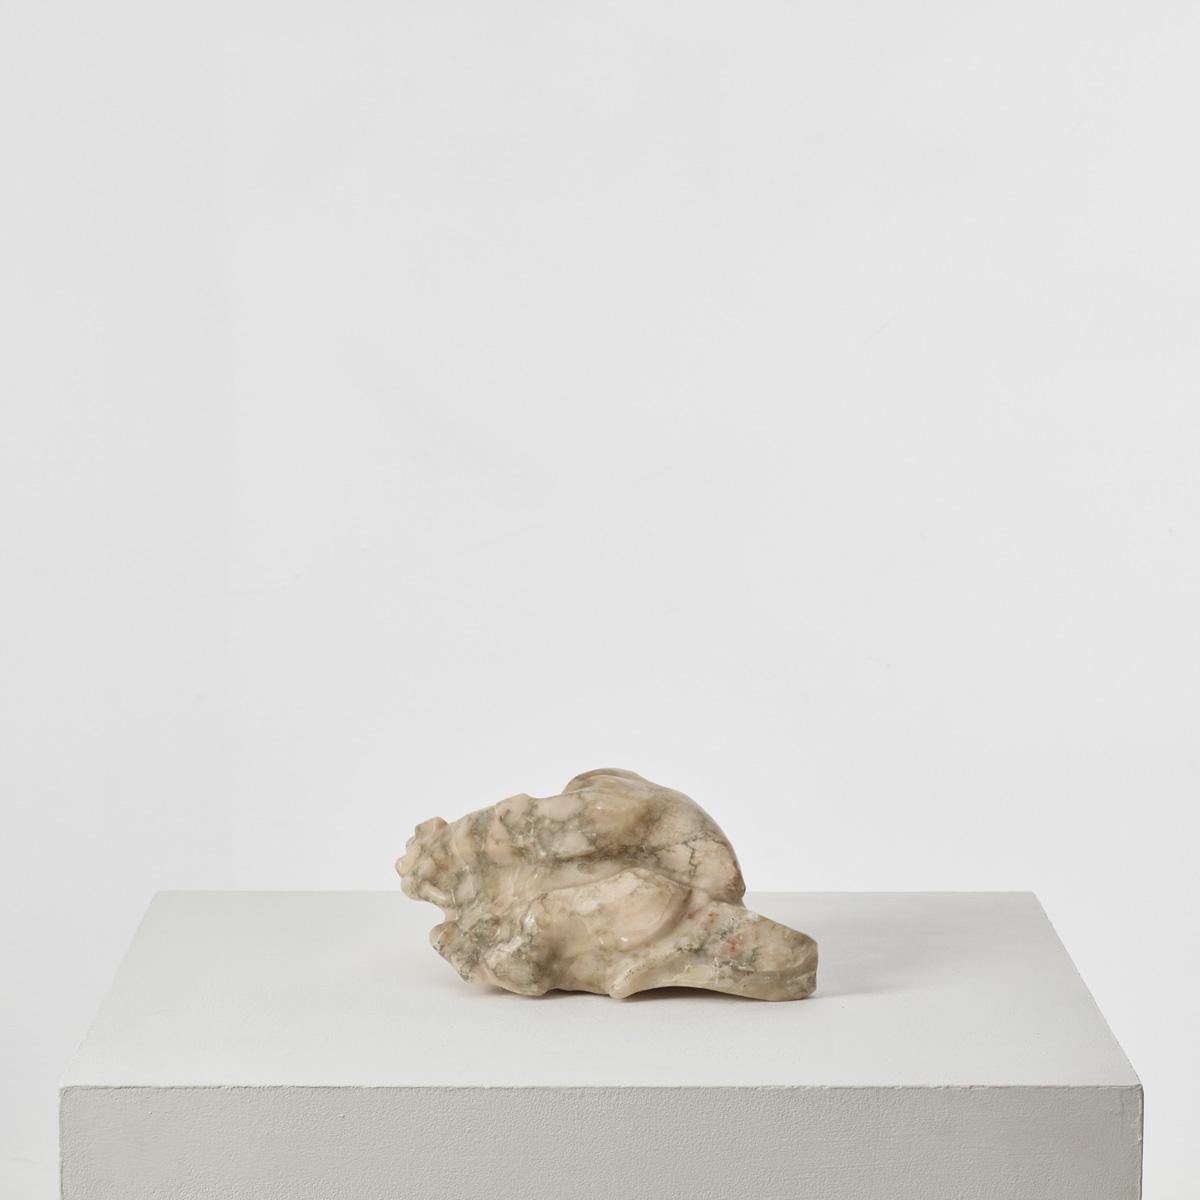 As much an artefact to handle and caress as a sculptural object, this marble piece retains the ruggedness of nature but combines it with artistic form. A skein of veins is revealed through the direct carving, and the shaping of the rock gives voice